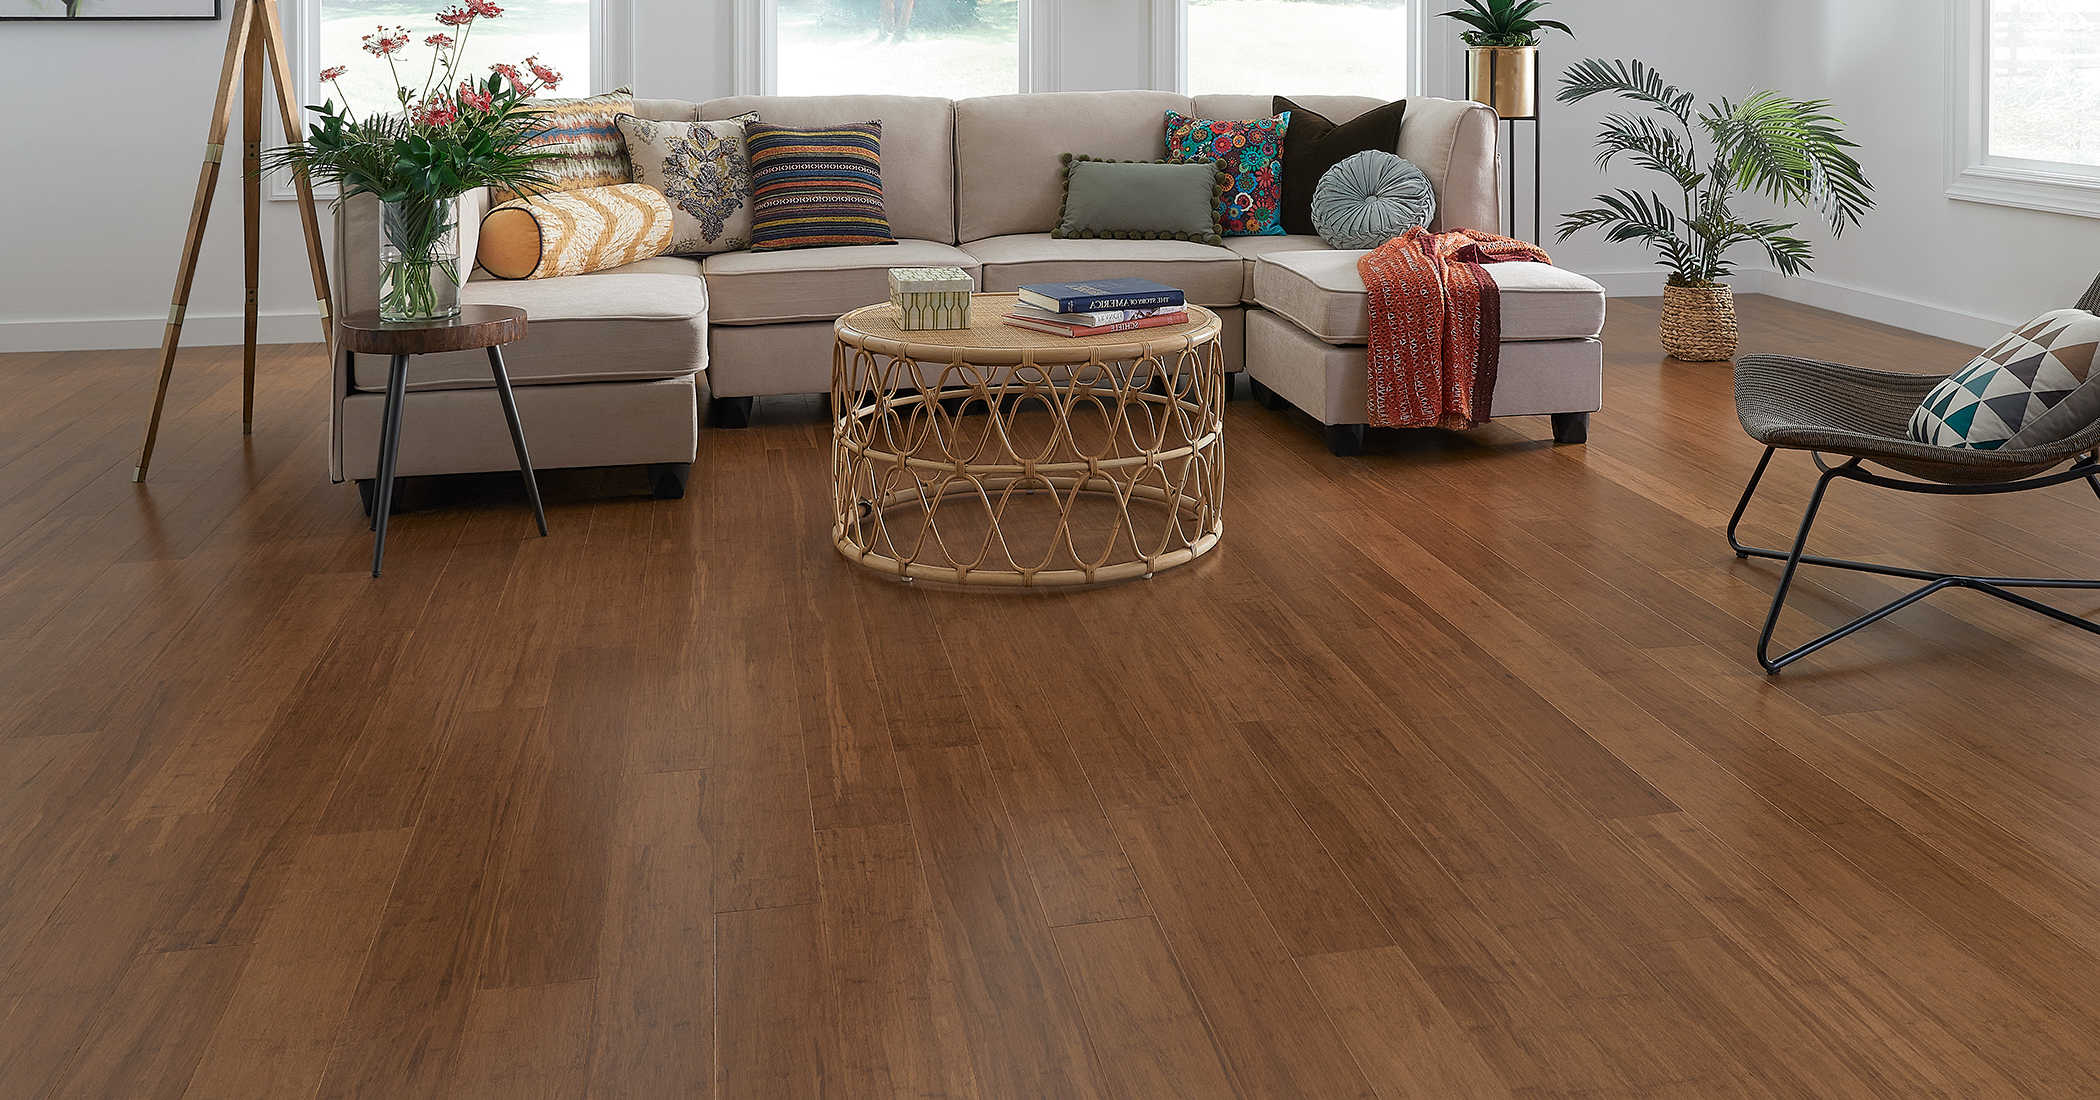 Carbonized Bamboo Flooring installed in a living room